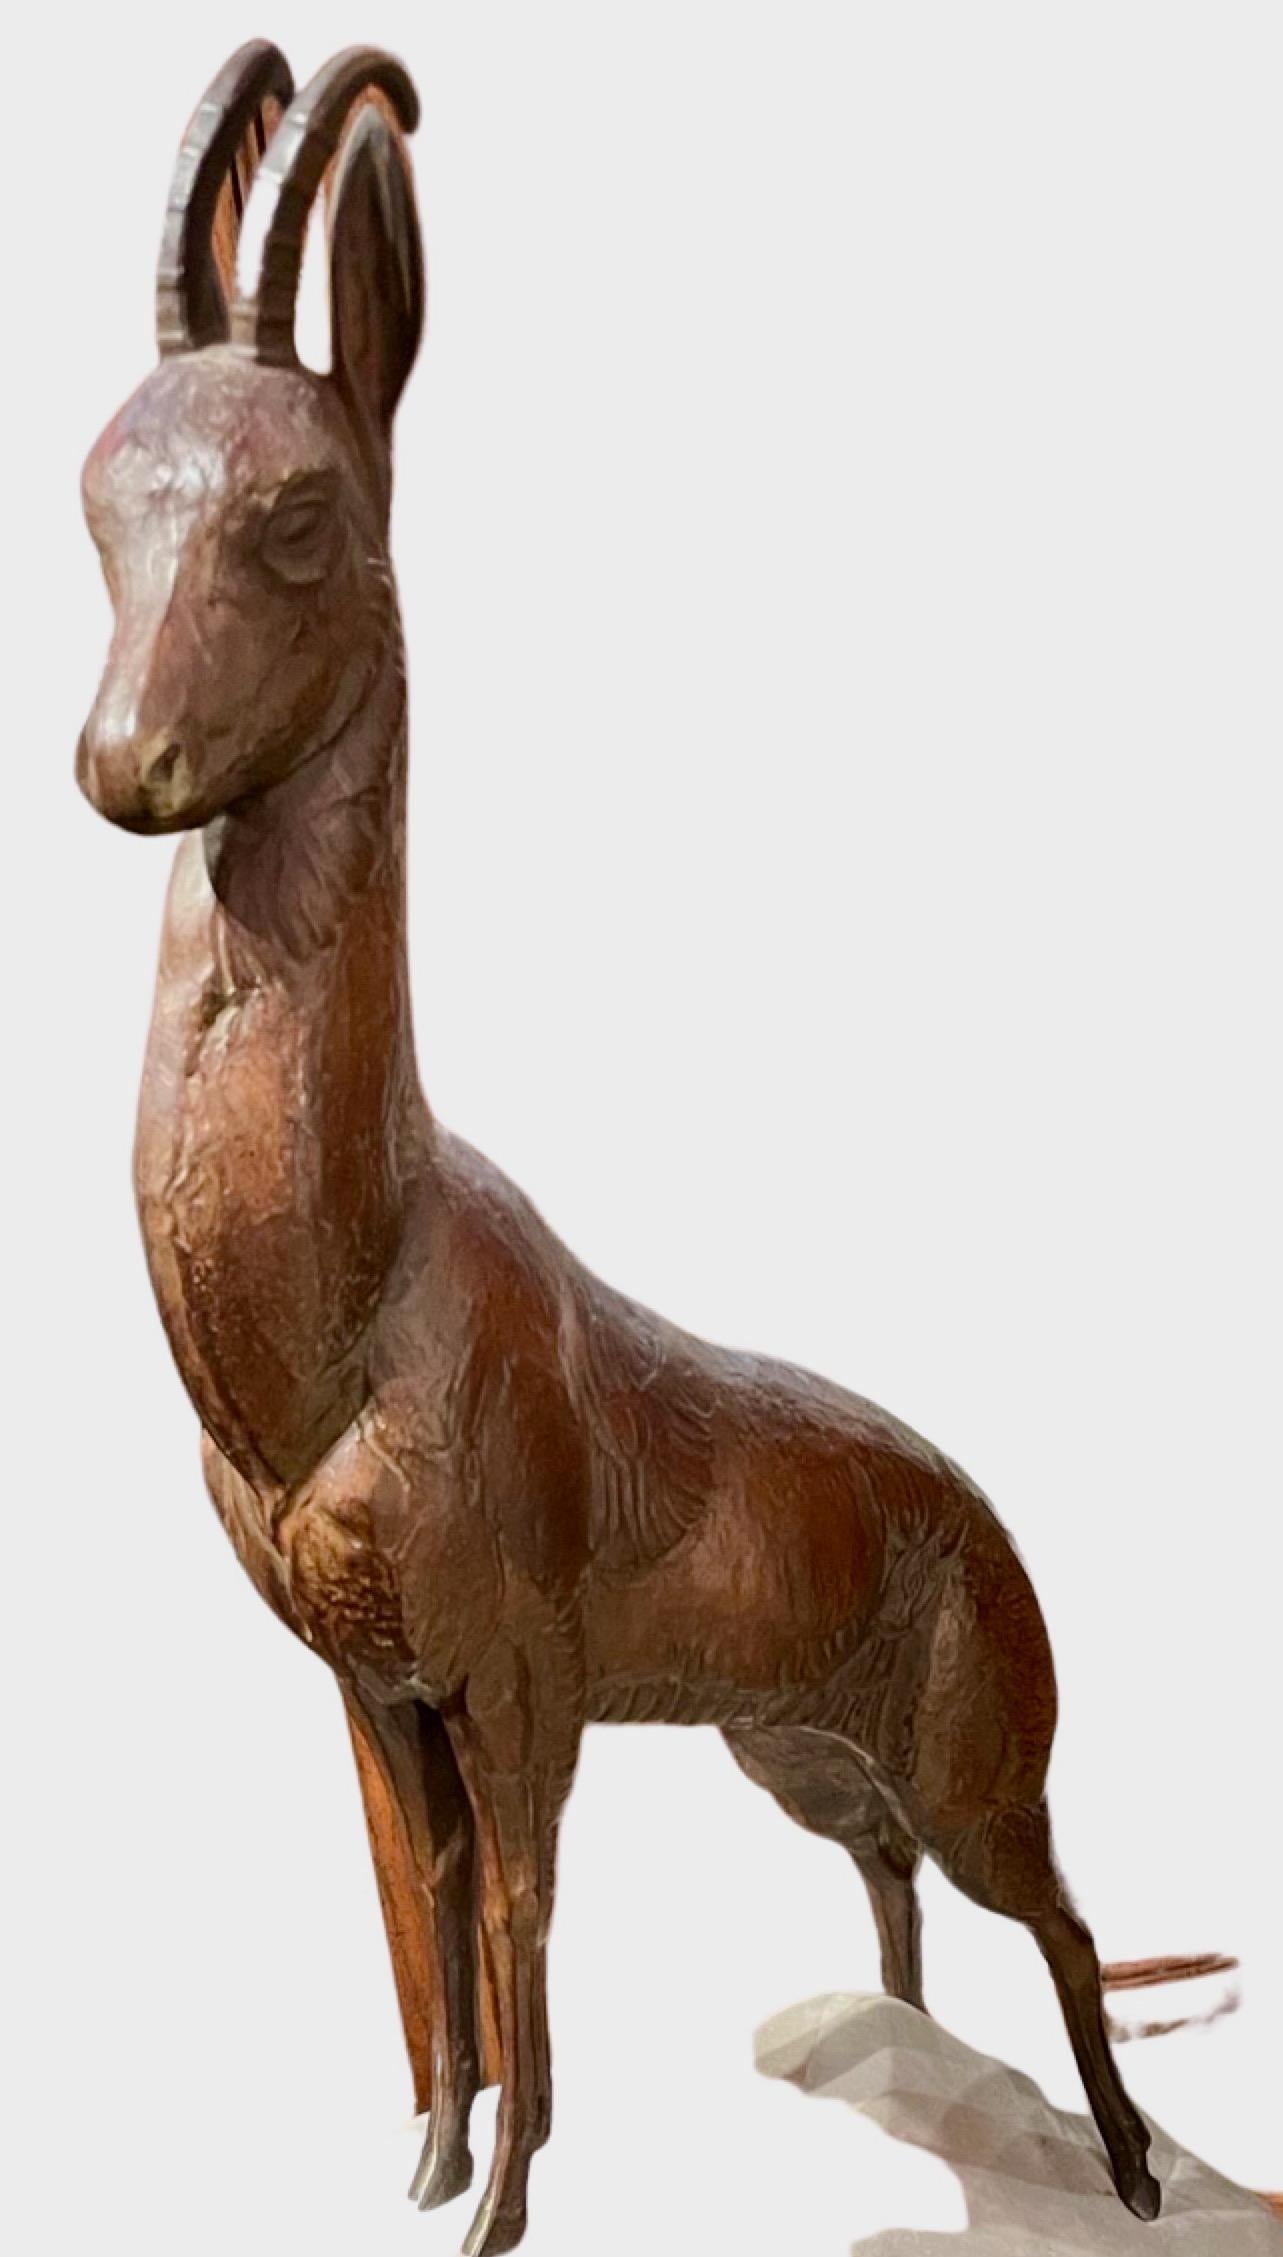 This piece stands 30 inches tall, a very statuesque pose for the Ibex, the fur and body details are also well defined as one can imagine this wild mountain goat in the most natural of settings. Very fine original condition. This rare piece, for the